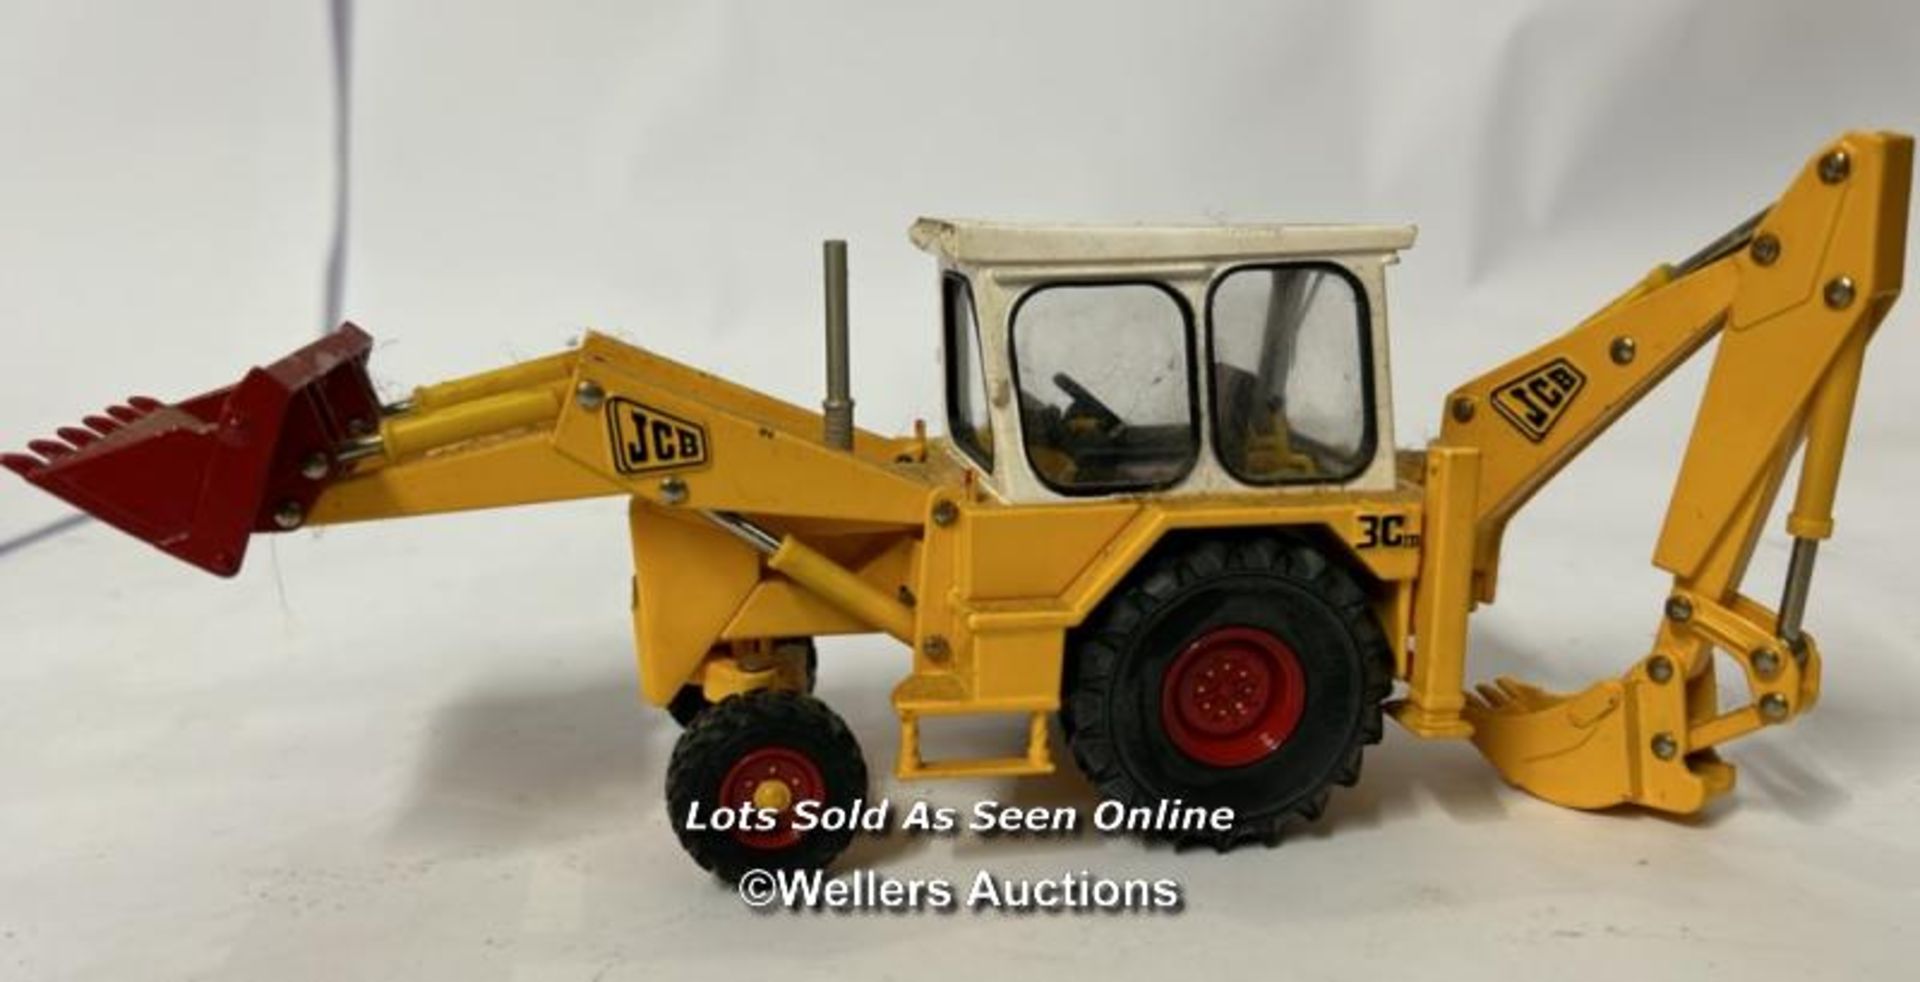 Britain's JCB digger no. 42905 with two model tractors / AN4 - Image 2 of 9